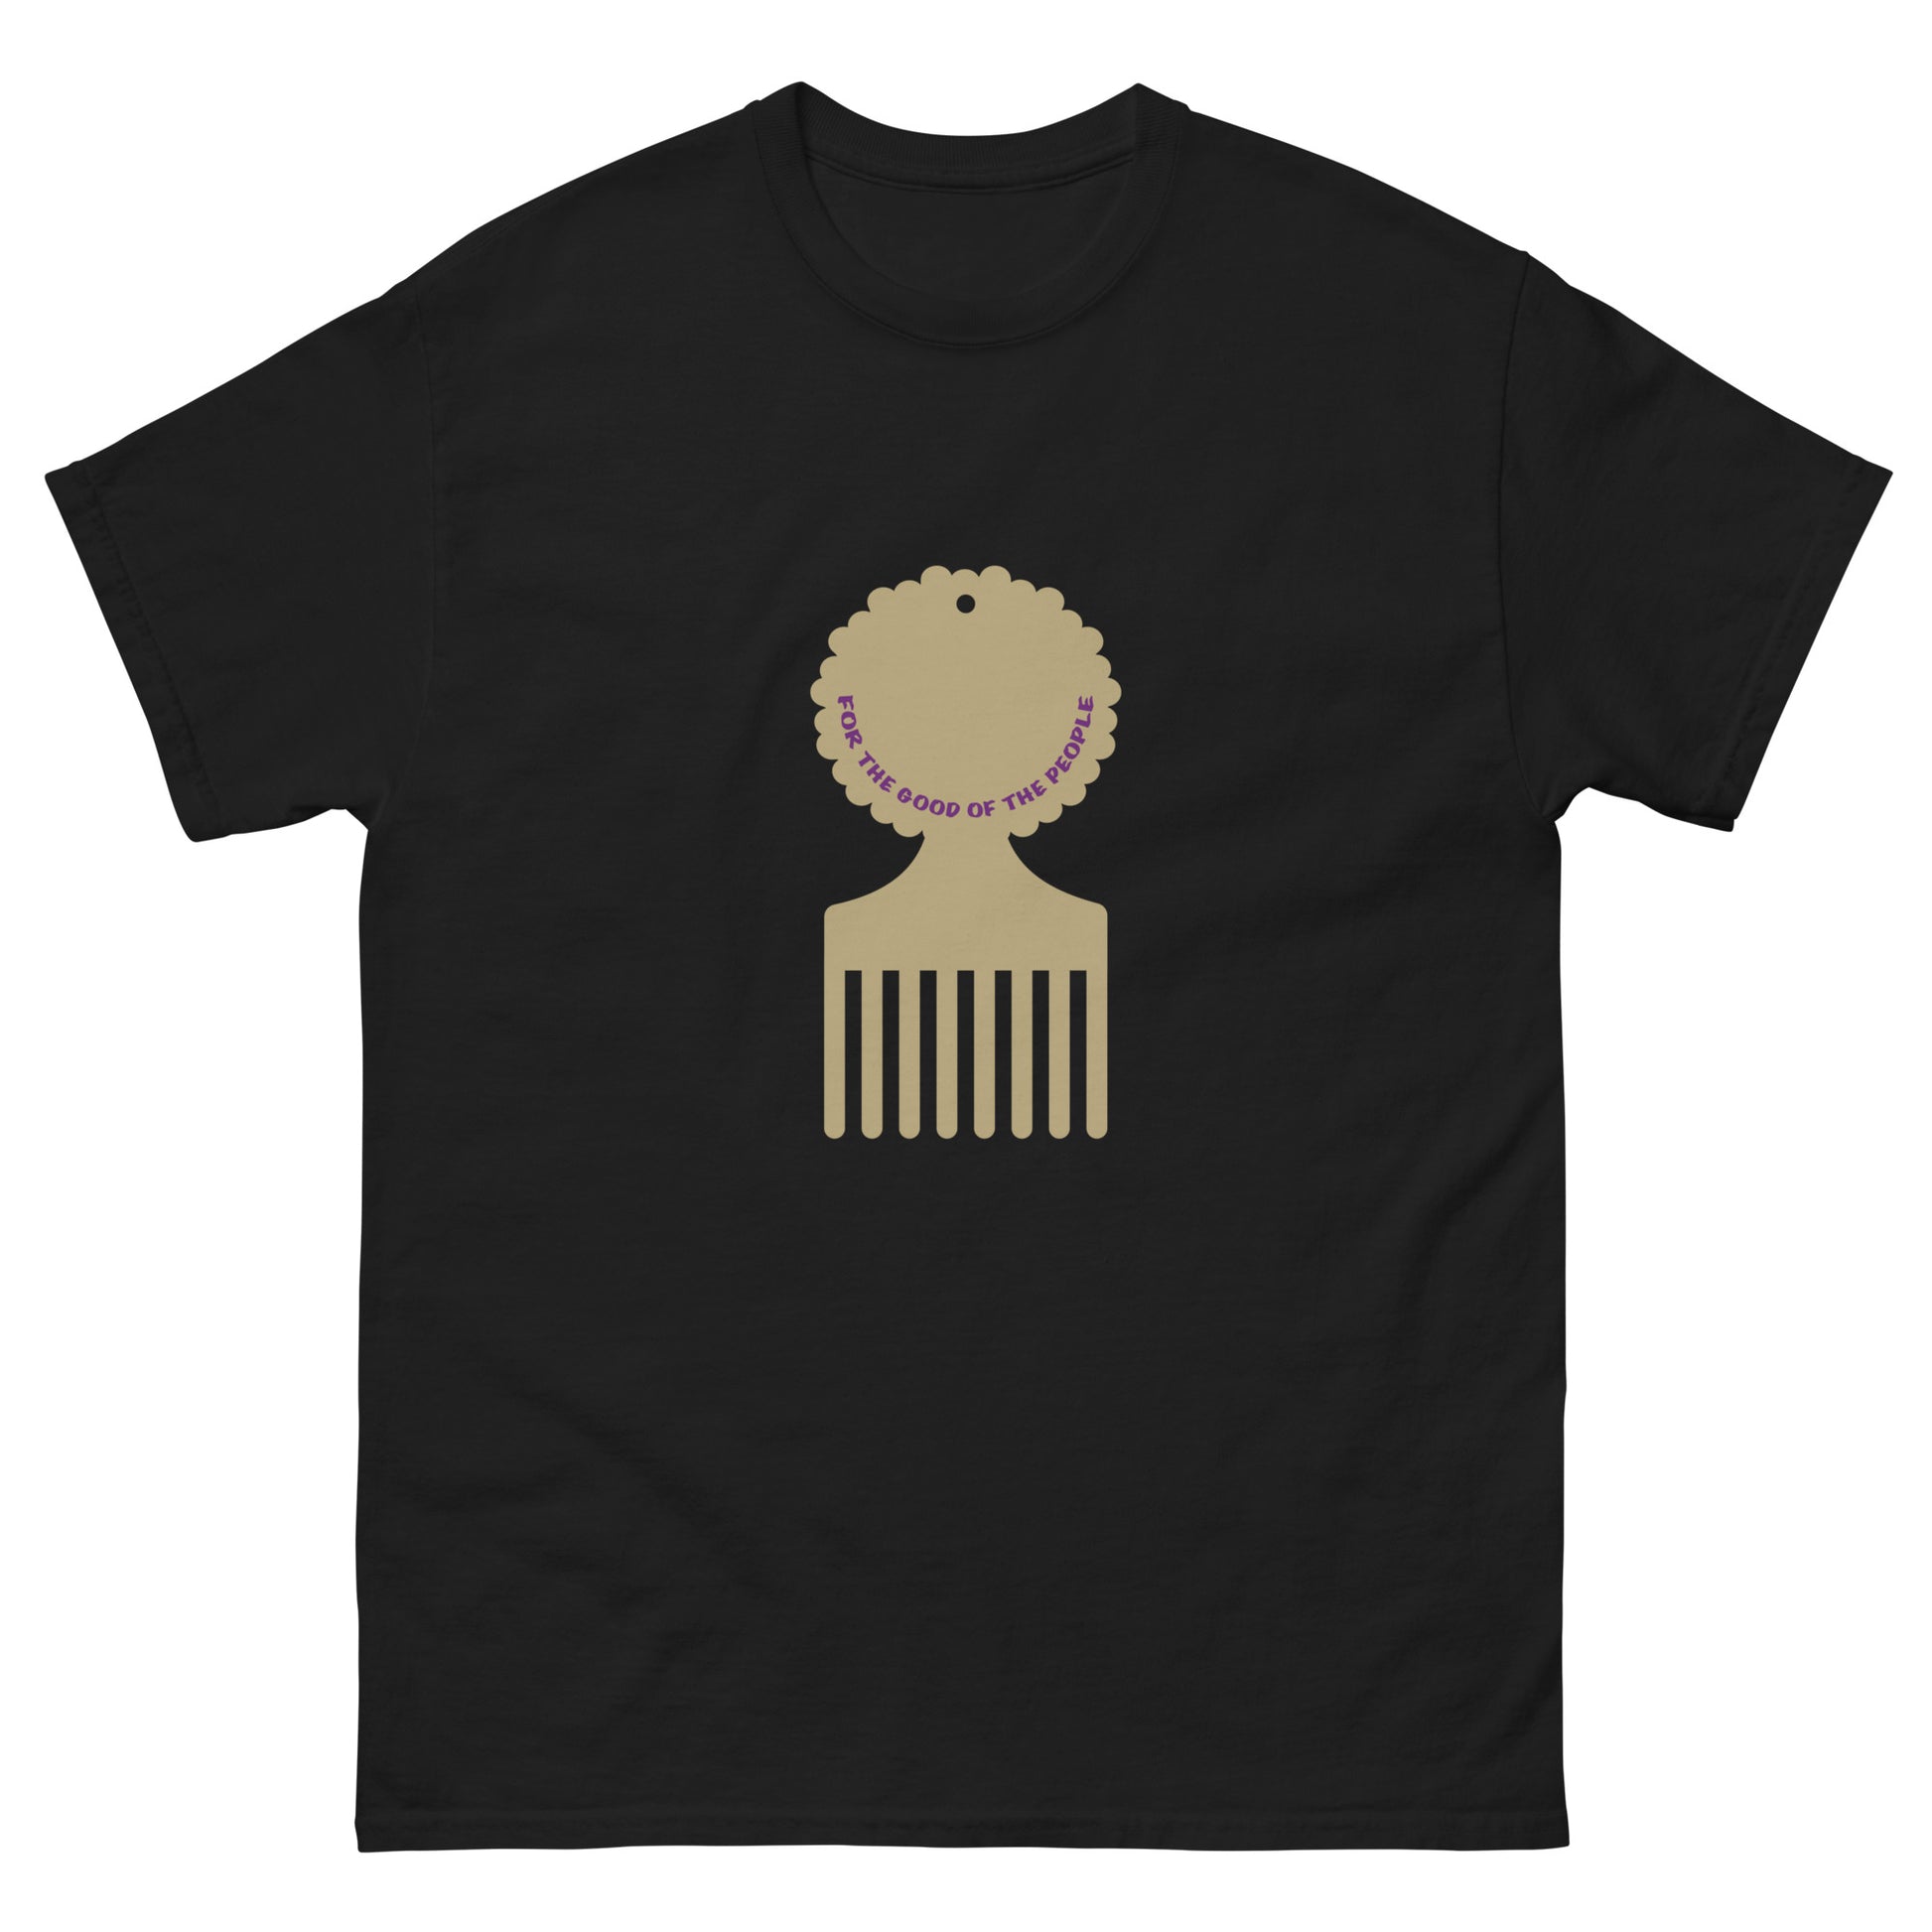 Men's black tee with gold afro pick in the center of shirt, with for the good of the people in purple inside the afro pick's handle.